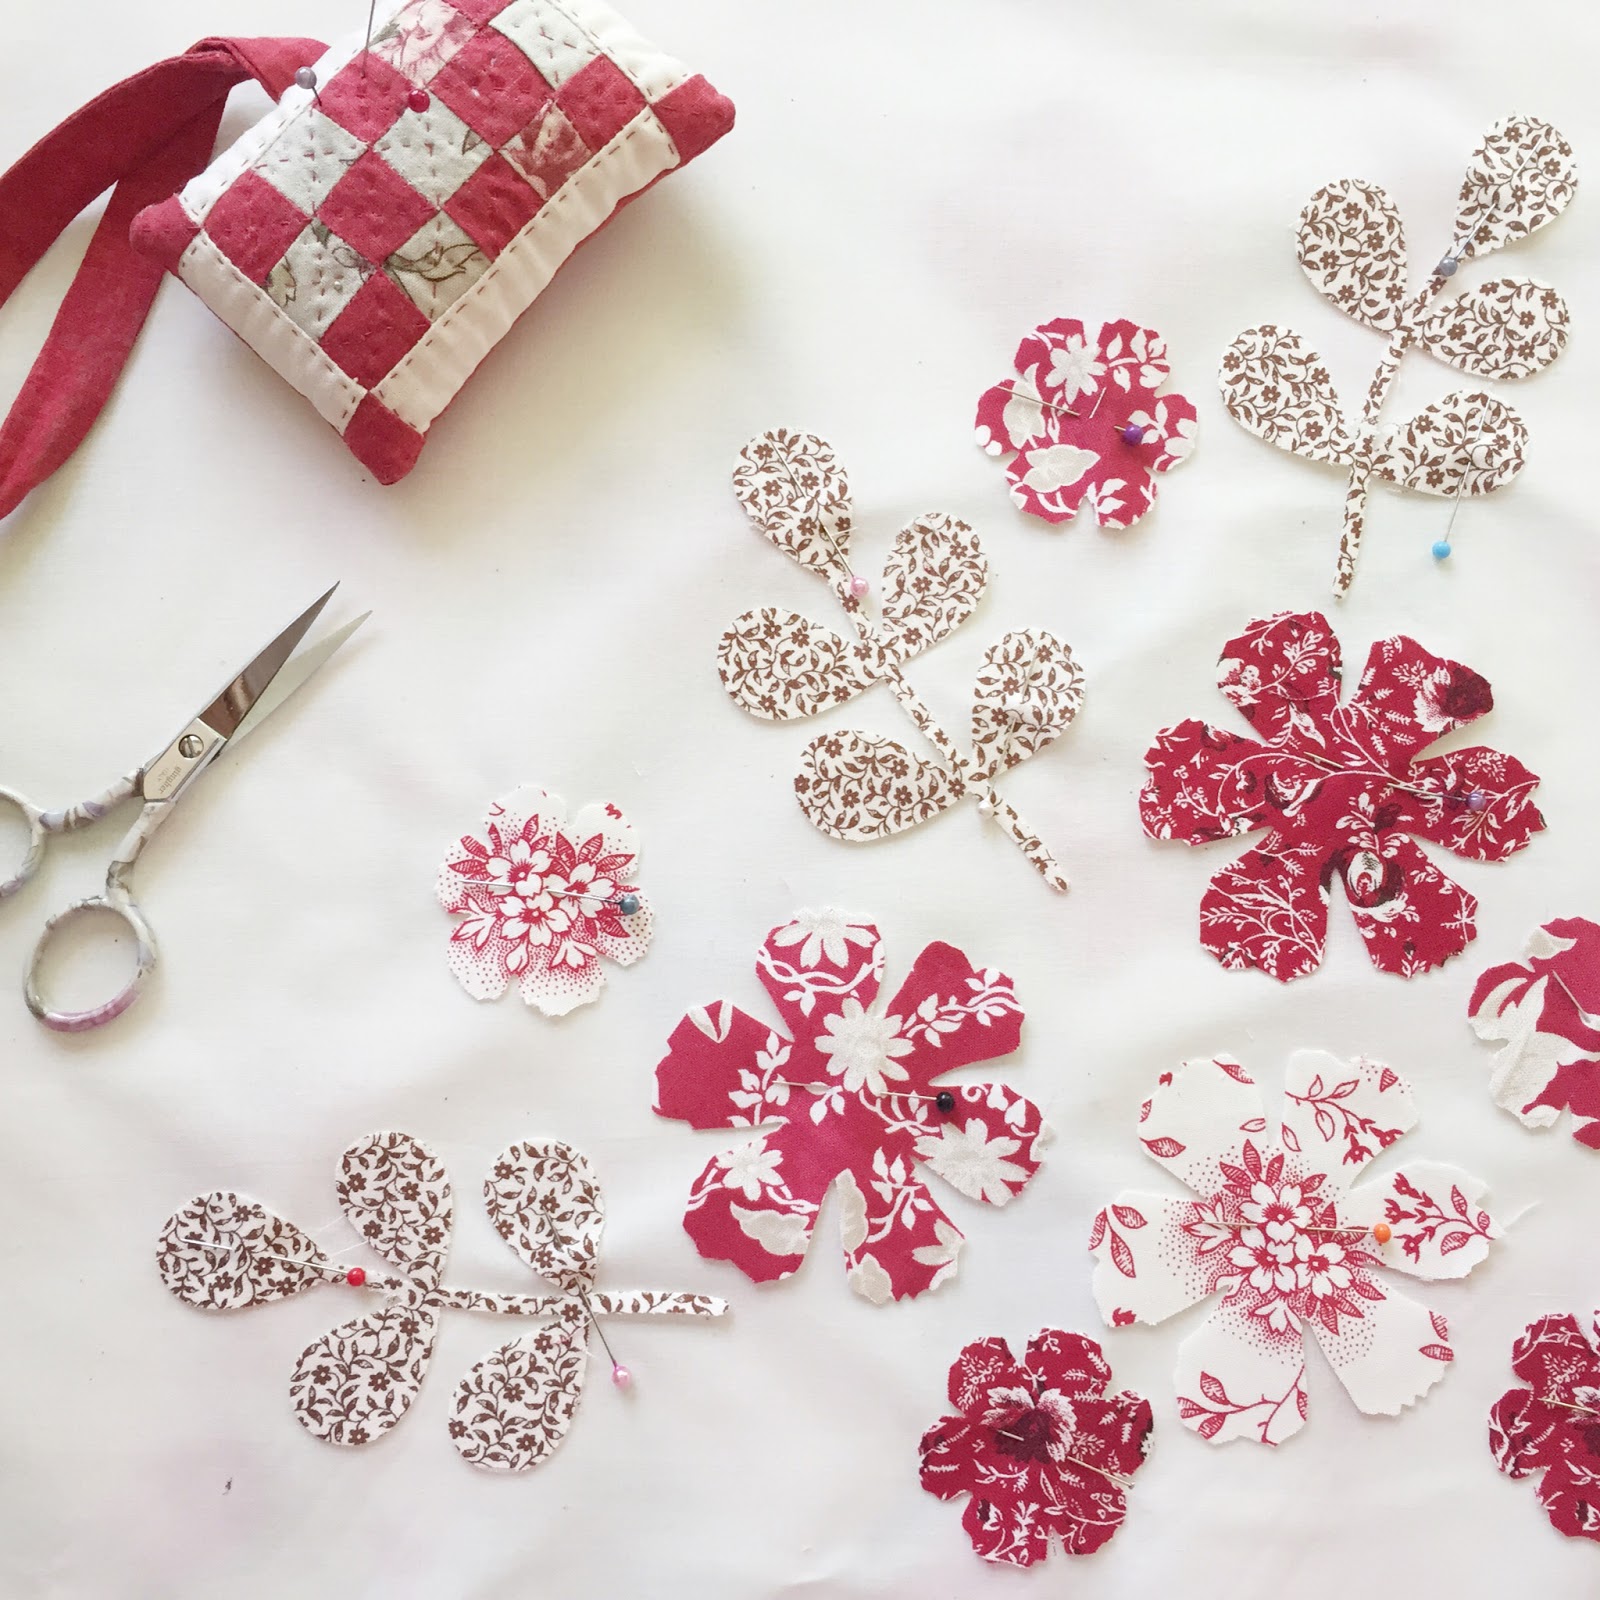 Crafting ideas from Sizzix UK: Summer Tattered Flower Cushion